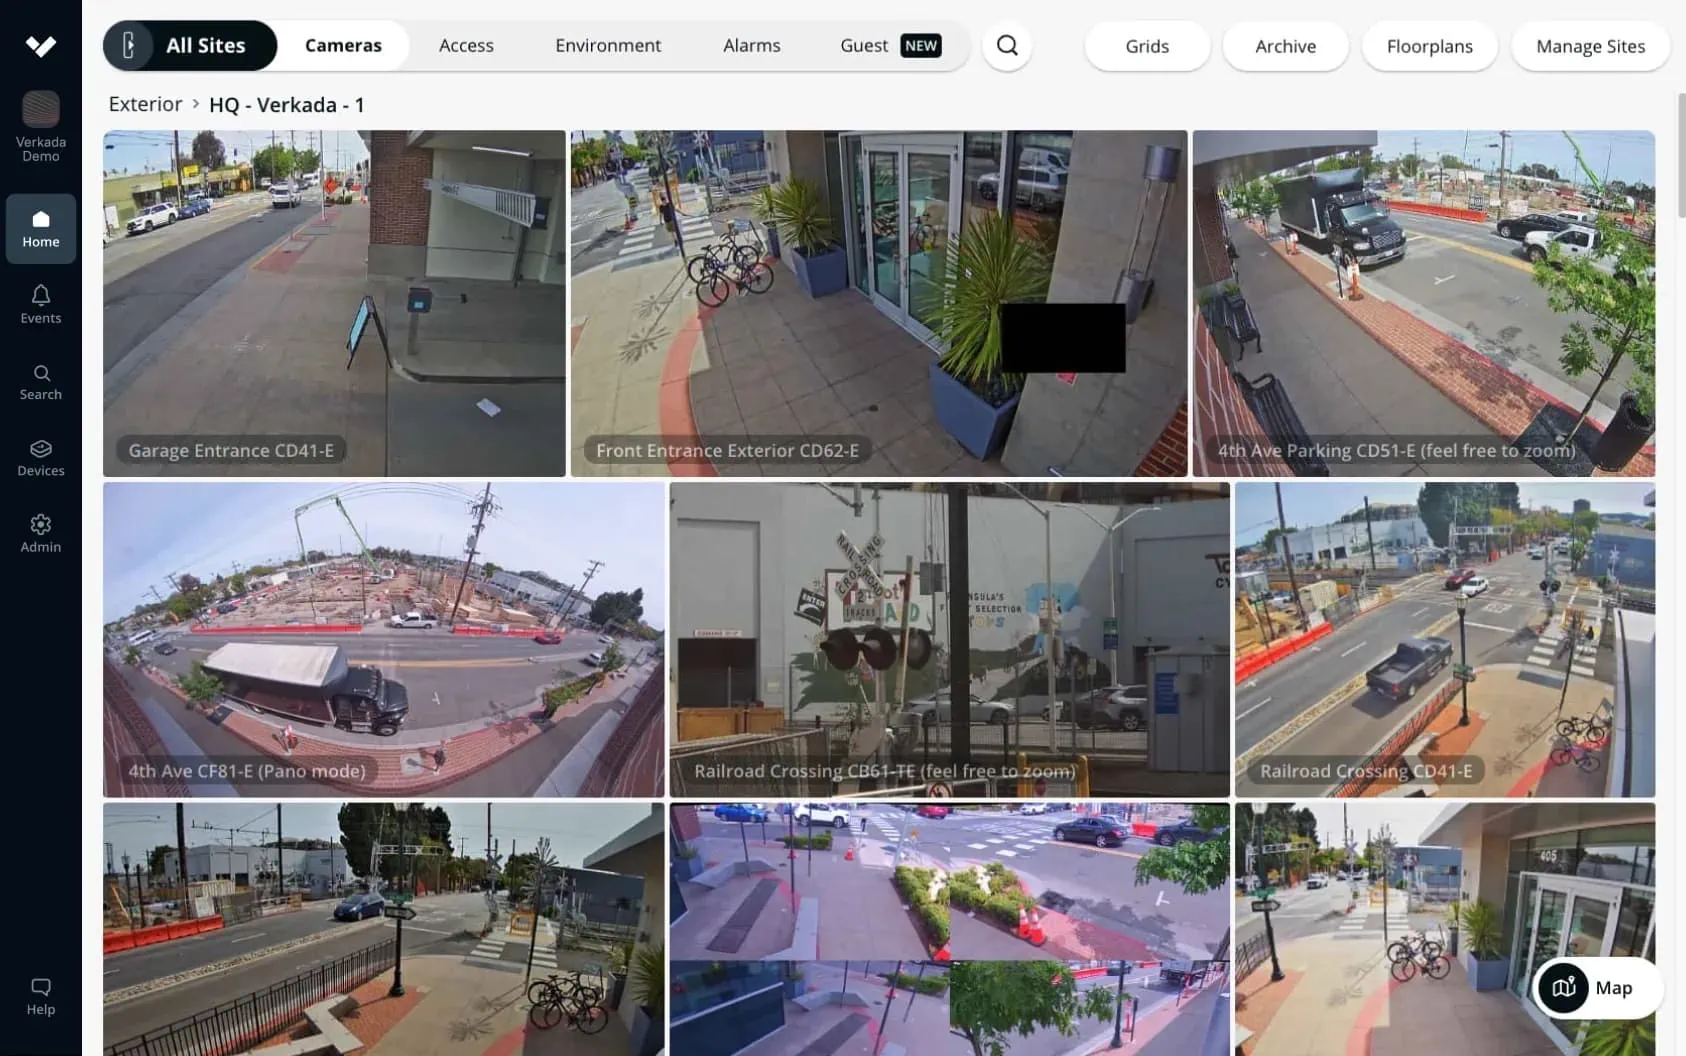 Command interface displaying footage captured by AI security systems